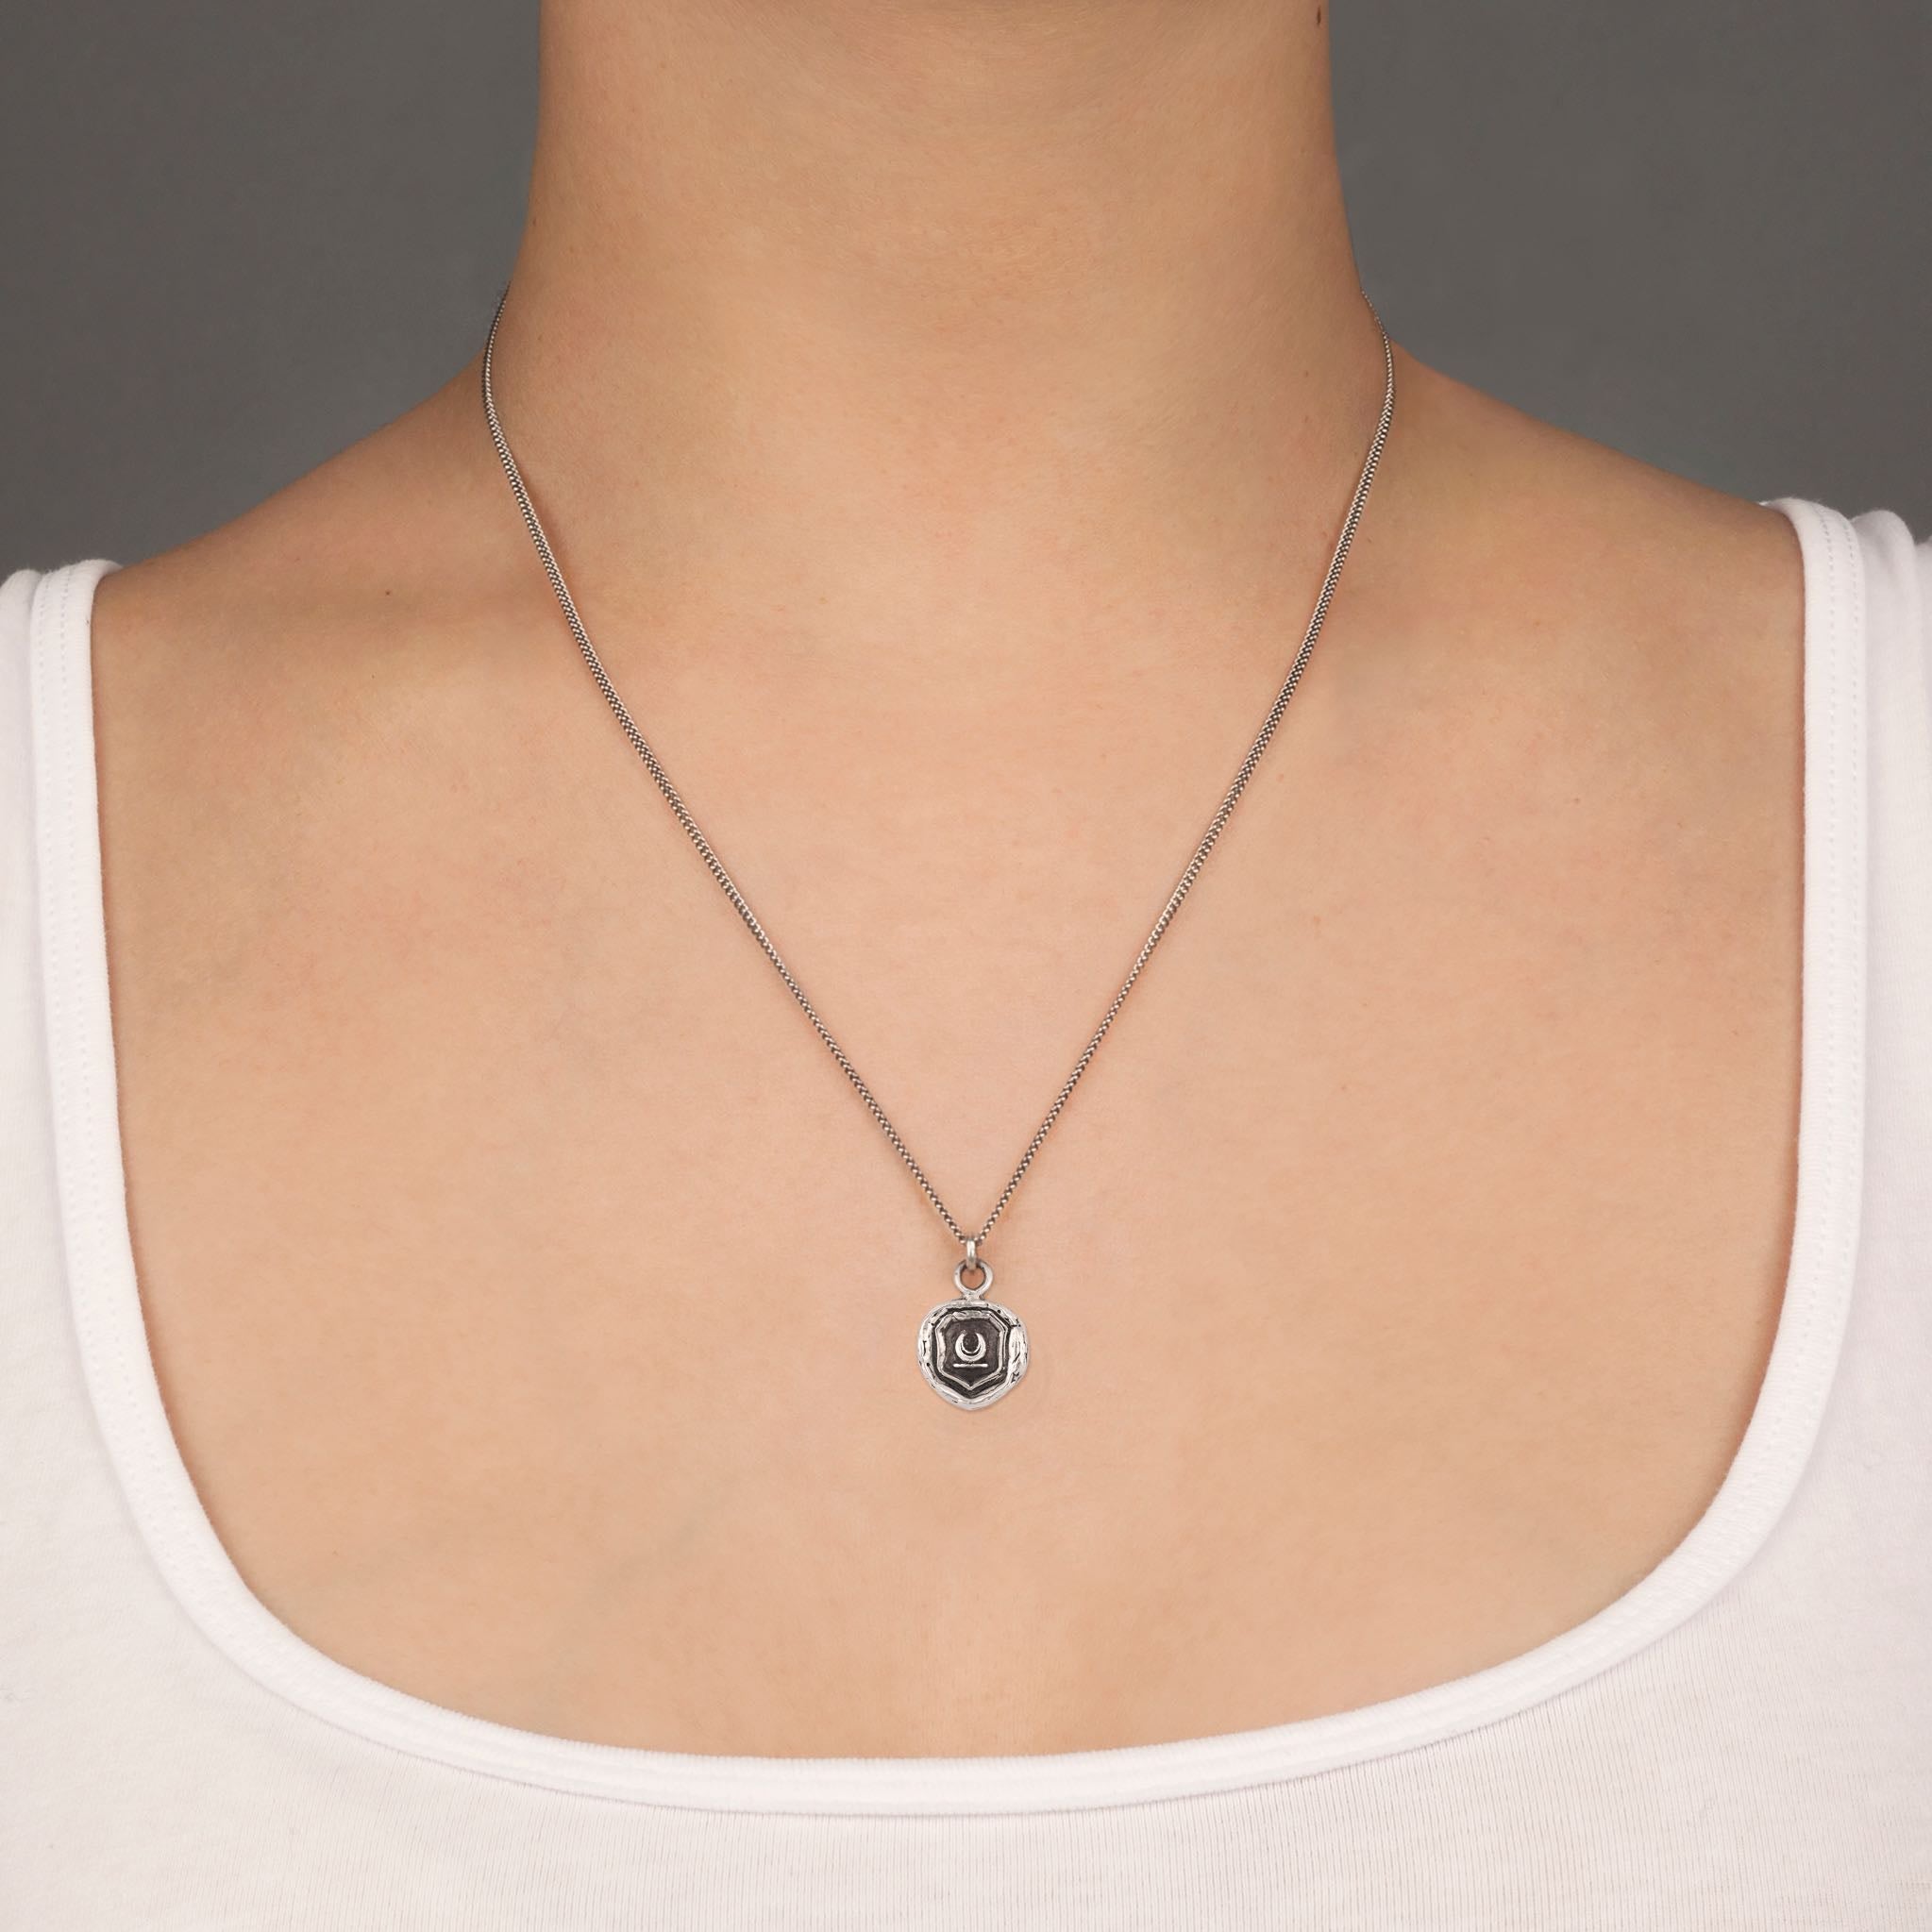 A close up of a model wearing Pyrrha's Oxidized Silver New Beginnings Talisman Necklace.